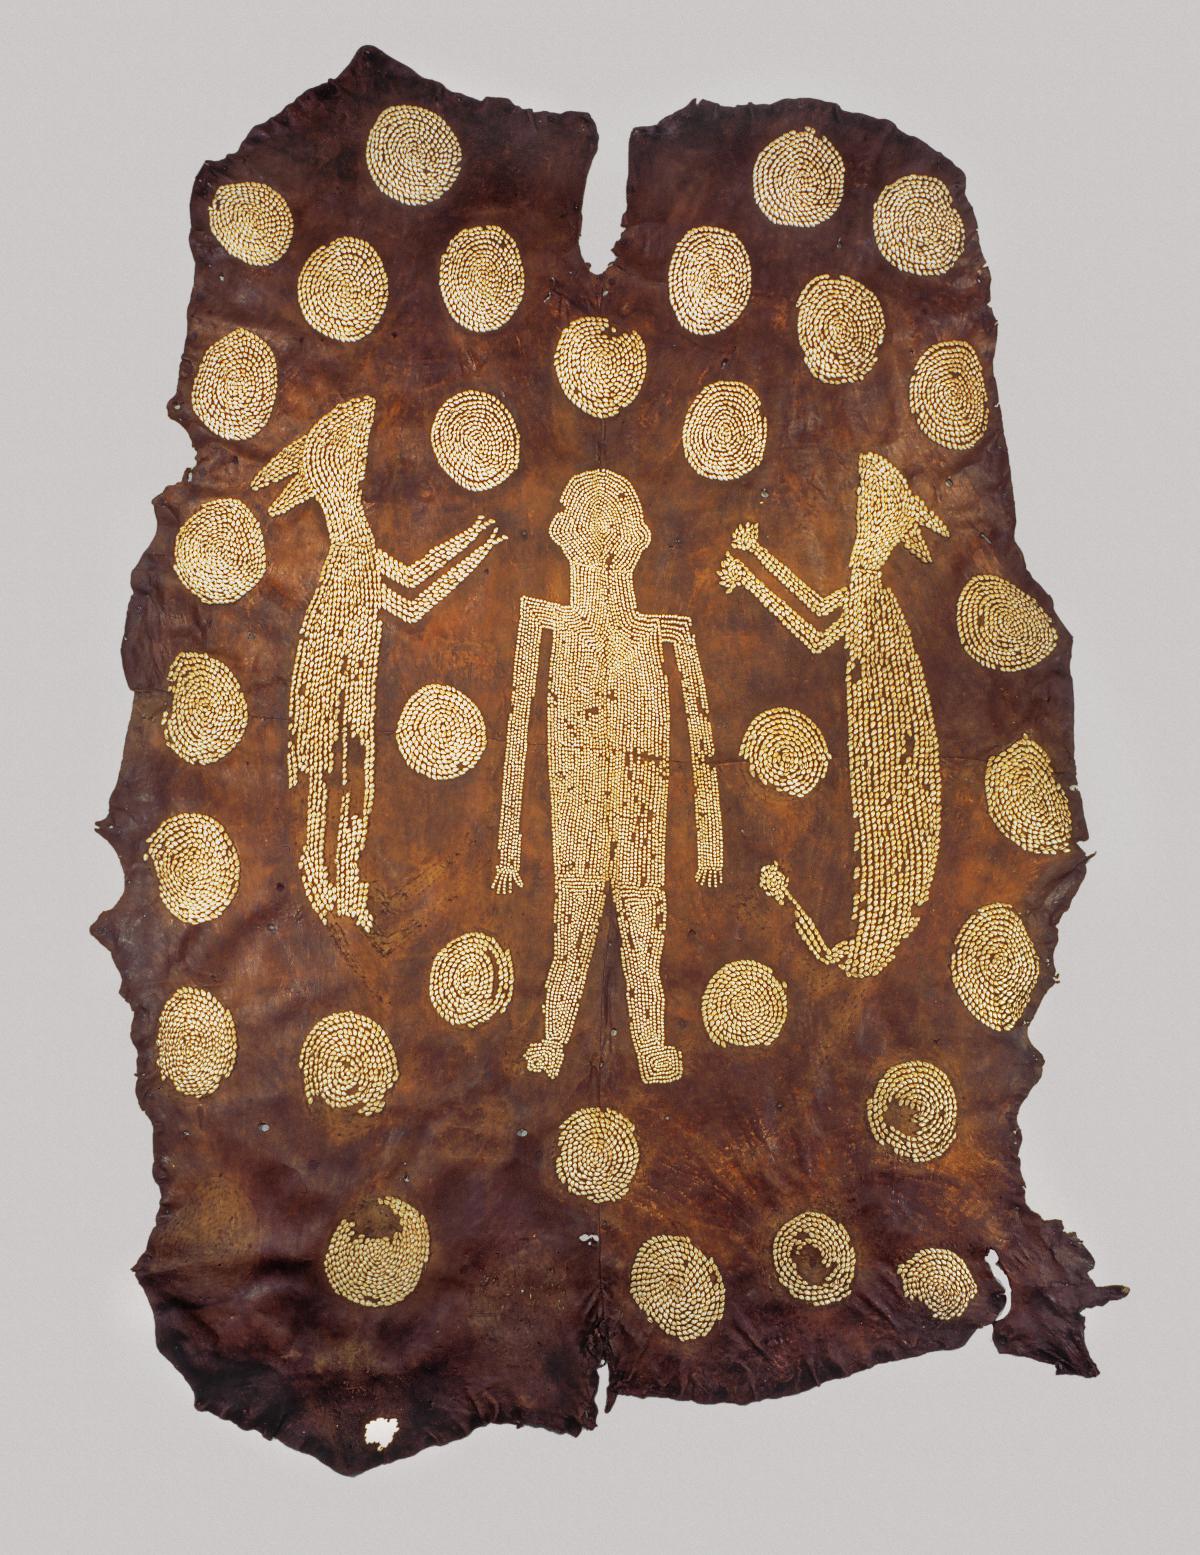 deerskin with a man carved into it